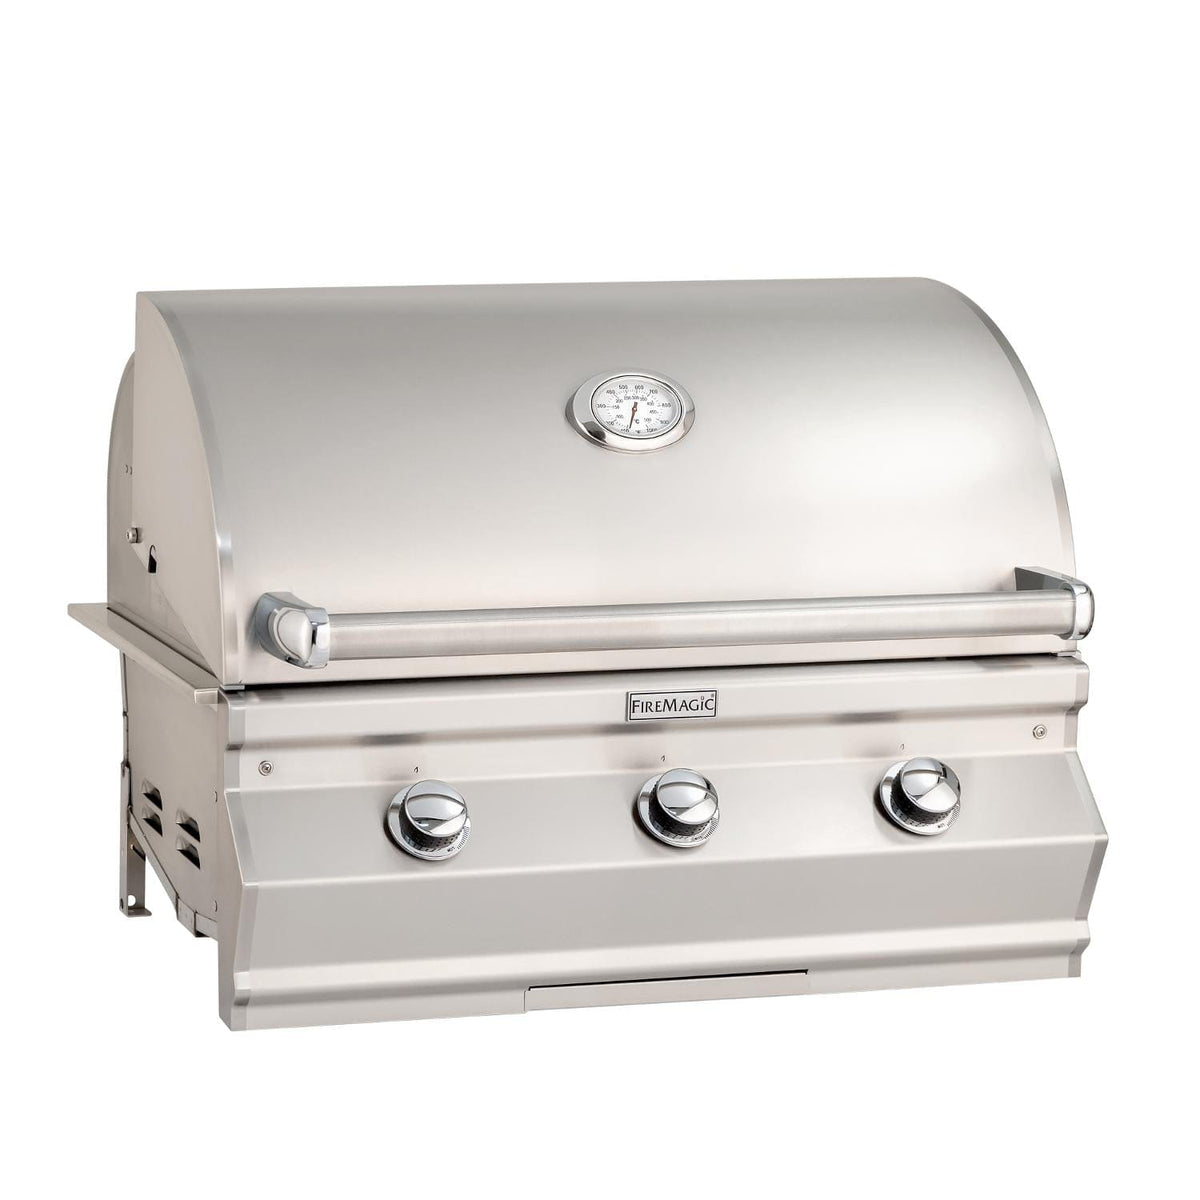 Firemagic Grills Fire Magic Choice C540I 30-Inch Built-In Gas Grill With Analog Thermometer - C540I-RT1